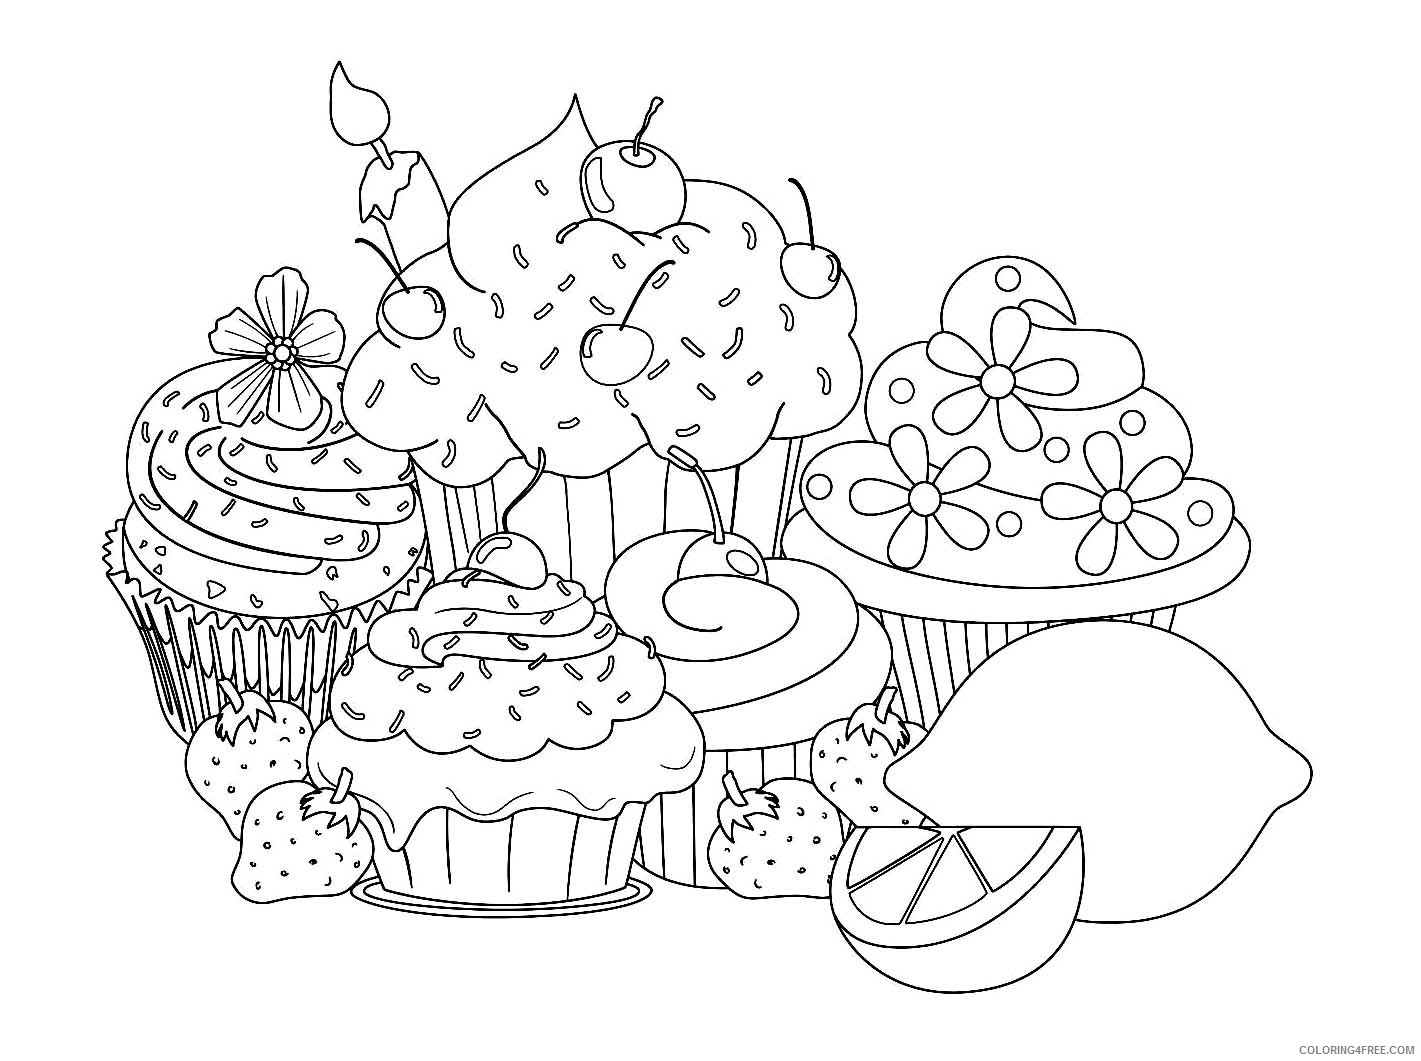 cupcake coloring pages for adults Coloring4free